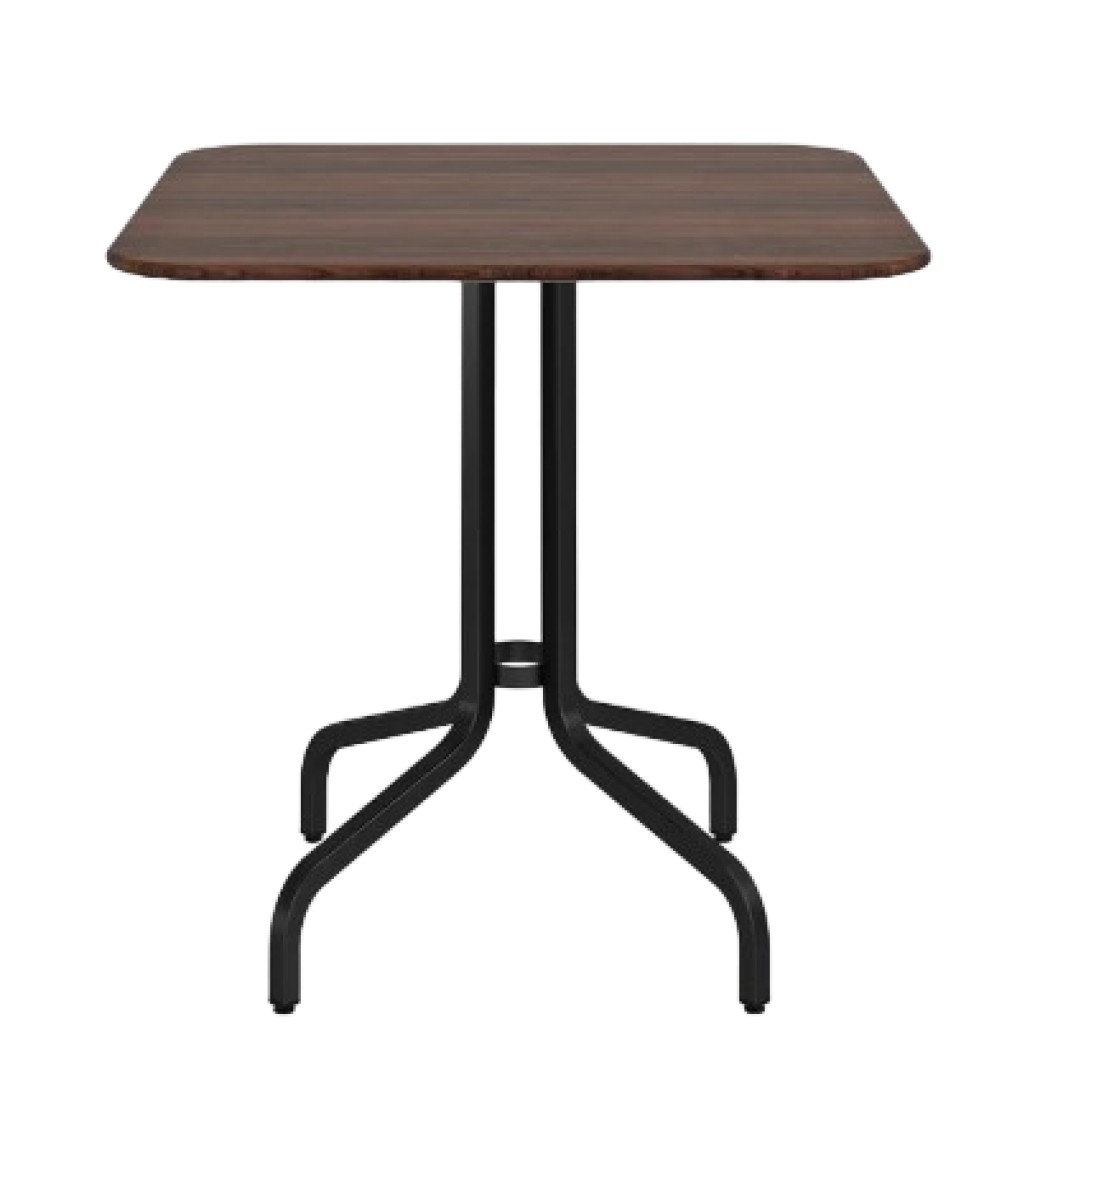 1 Inch Cafe Table, Rectangular